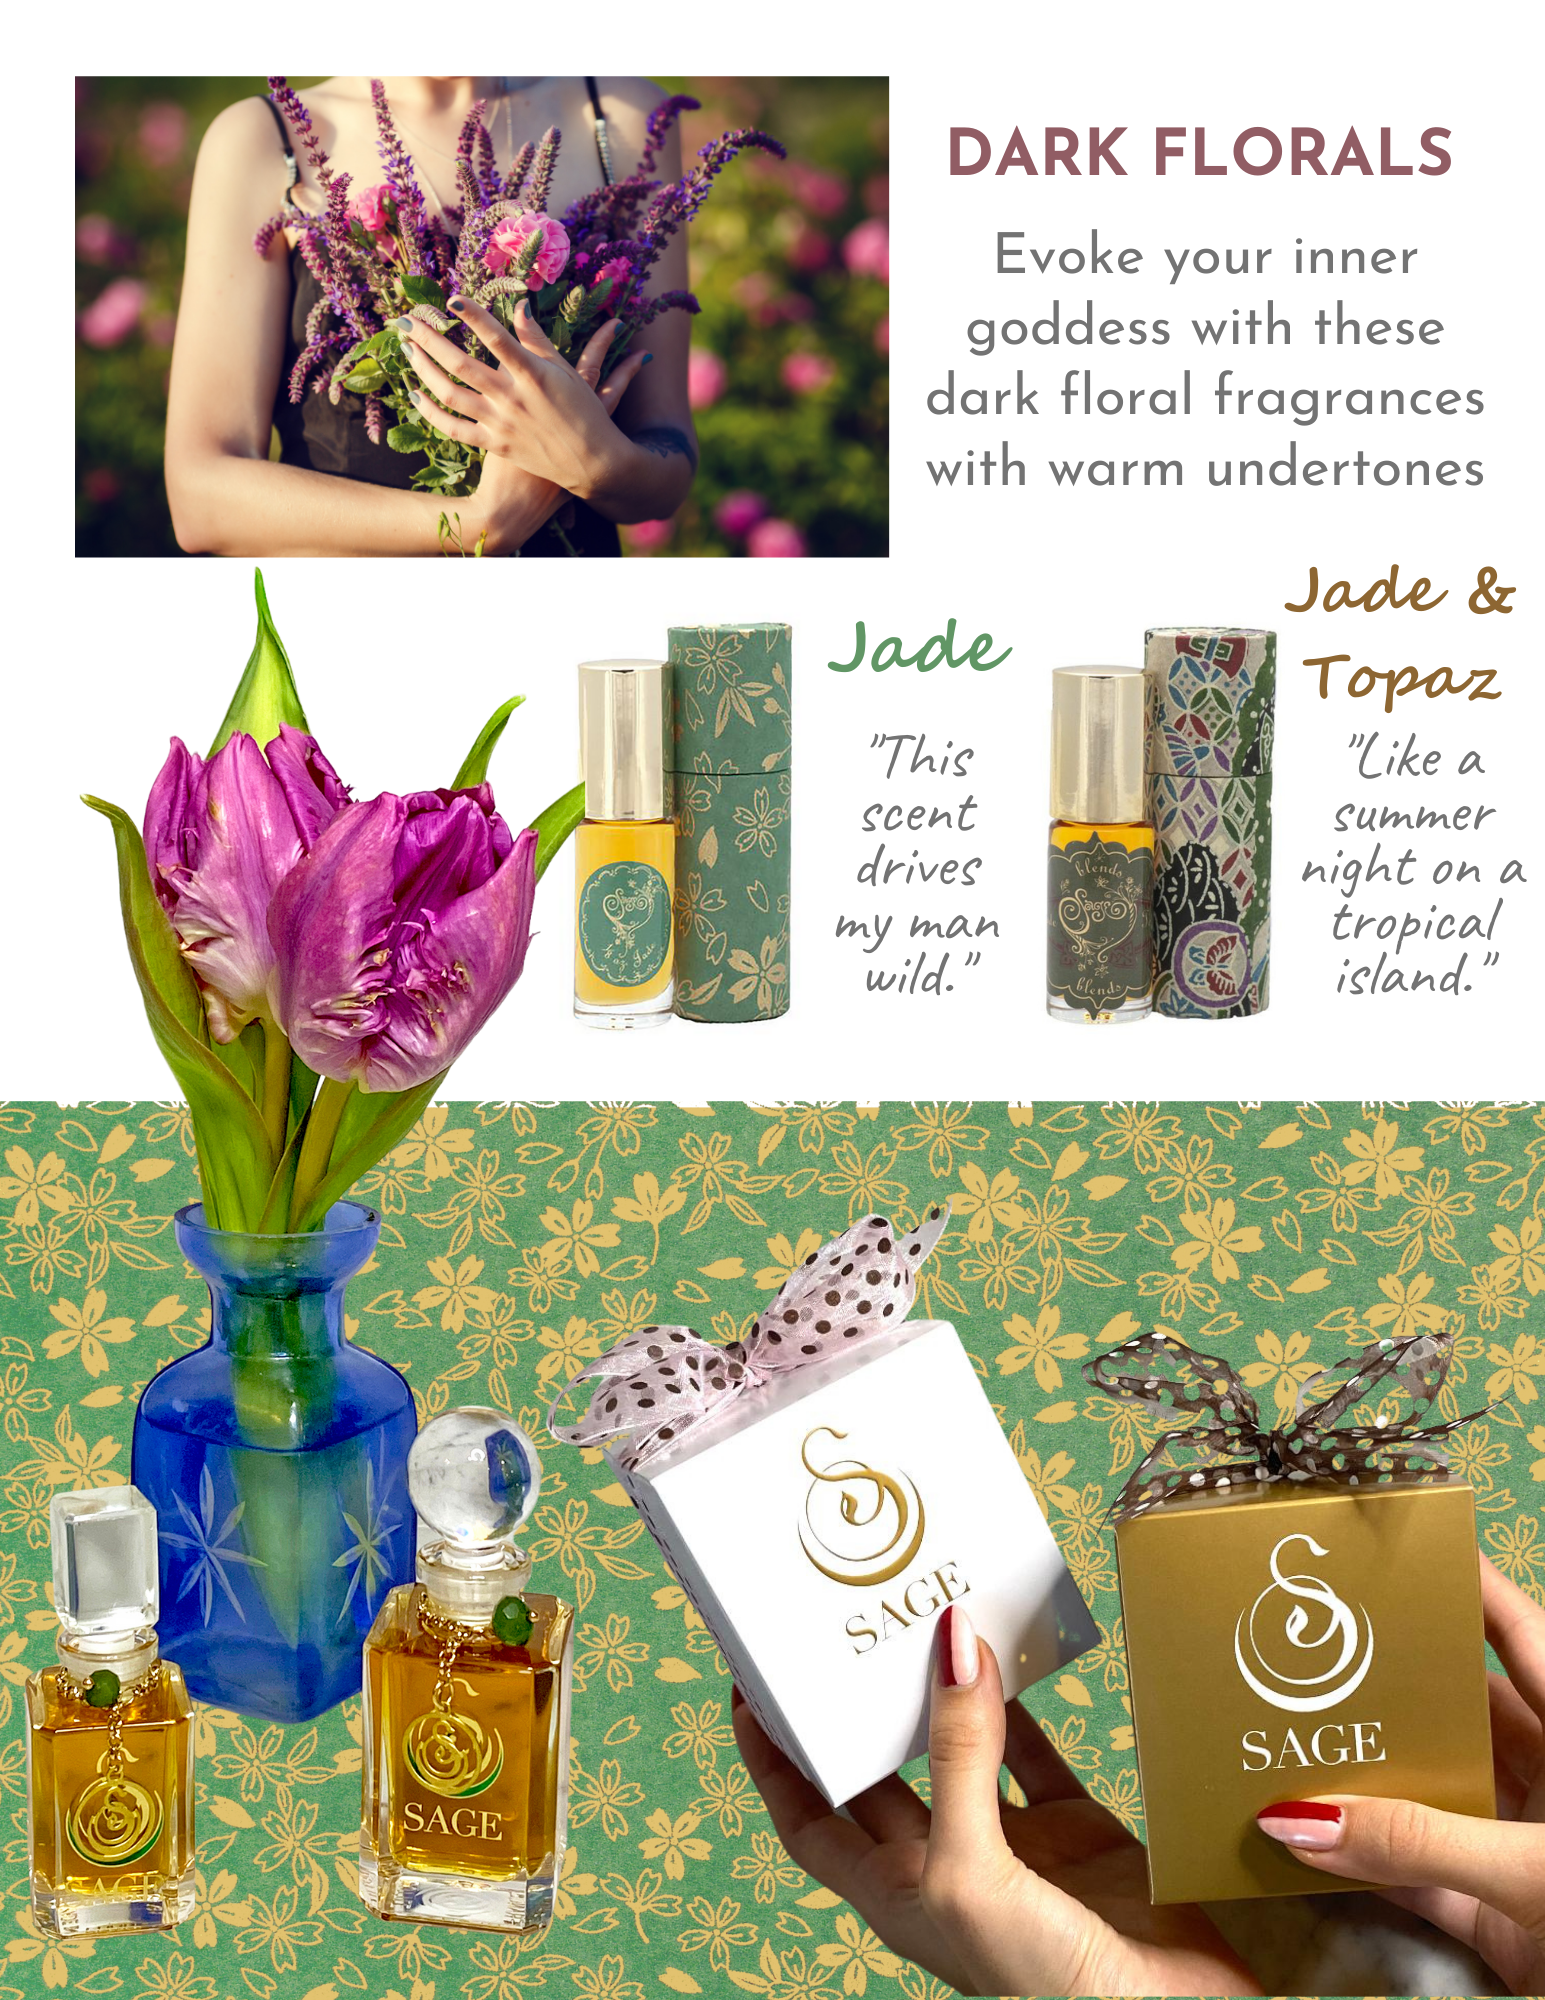 Image of jade and jade and topaz glass fragrance bottles with text “Dark florals evoke your inner goddess with these dark floral fragrances with warm undertones” “jade this scent drives my man wild” “jade and topaz like a summer night on a tropical island”.